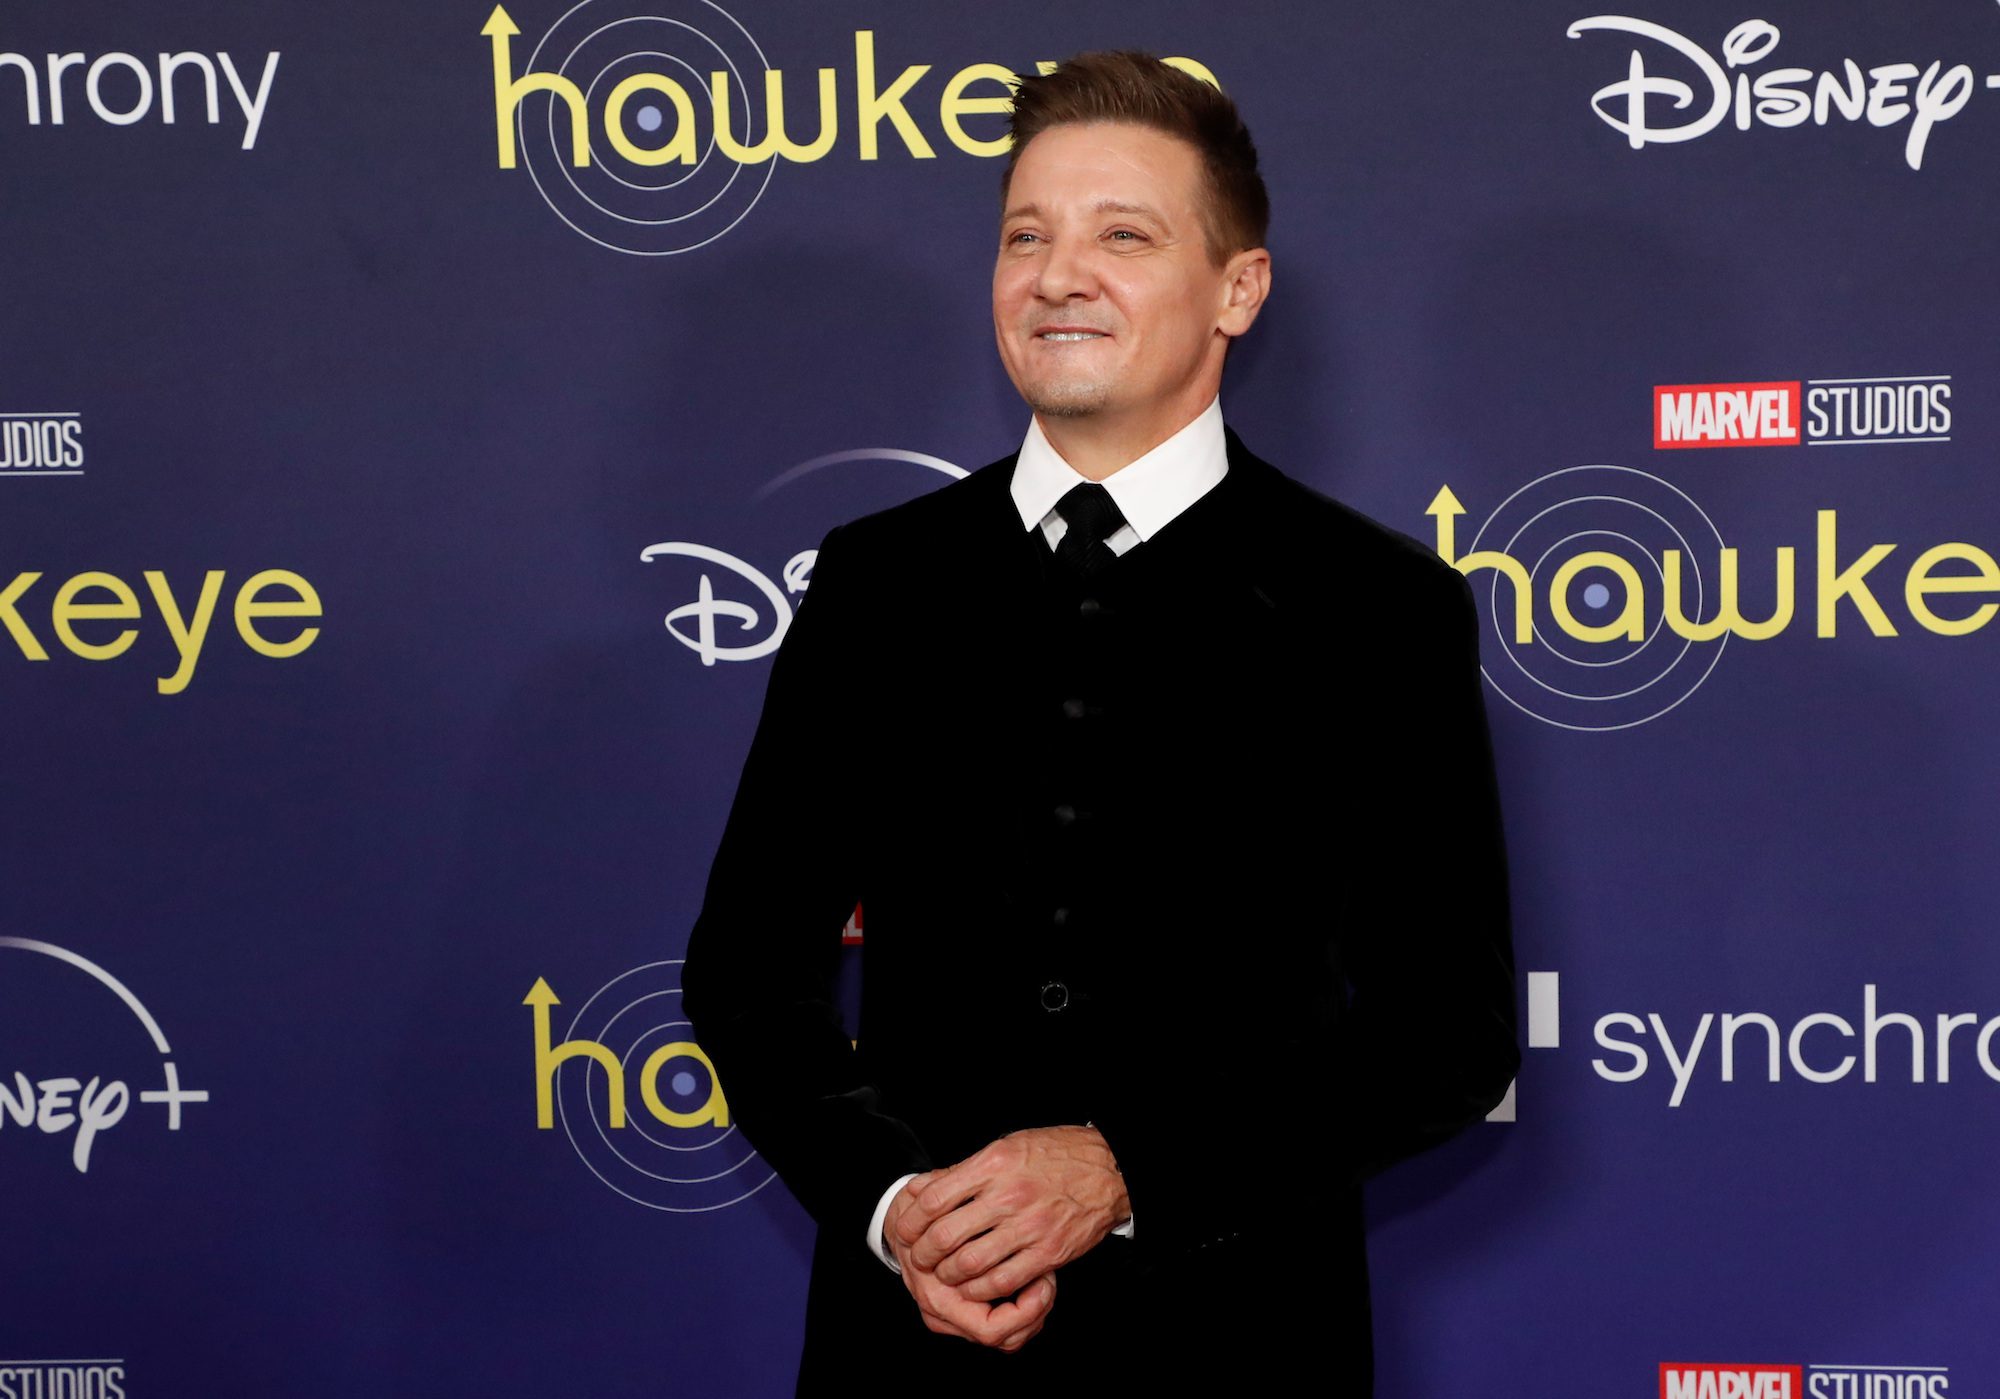 Actor Jeremy Renner arrives for the premiere of the television series Hawkeye at El Capitan theatre in Los Angeles, California, U.S. November, 17, 2021. REUTERS/Mario Anzuoni